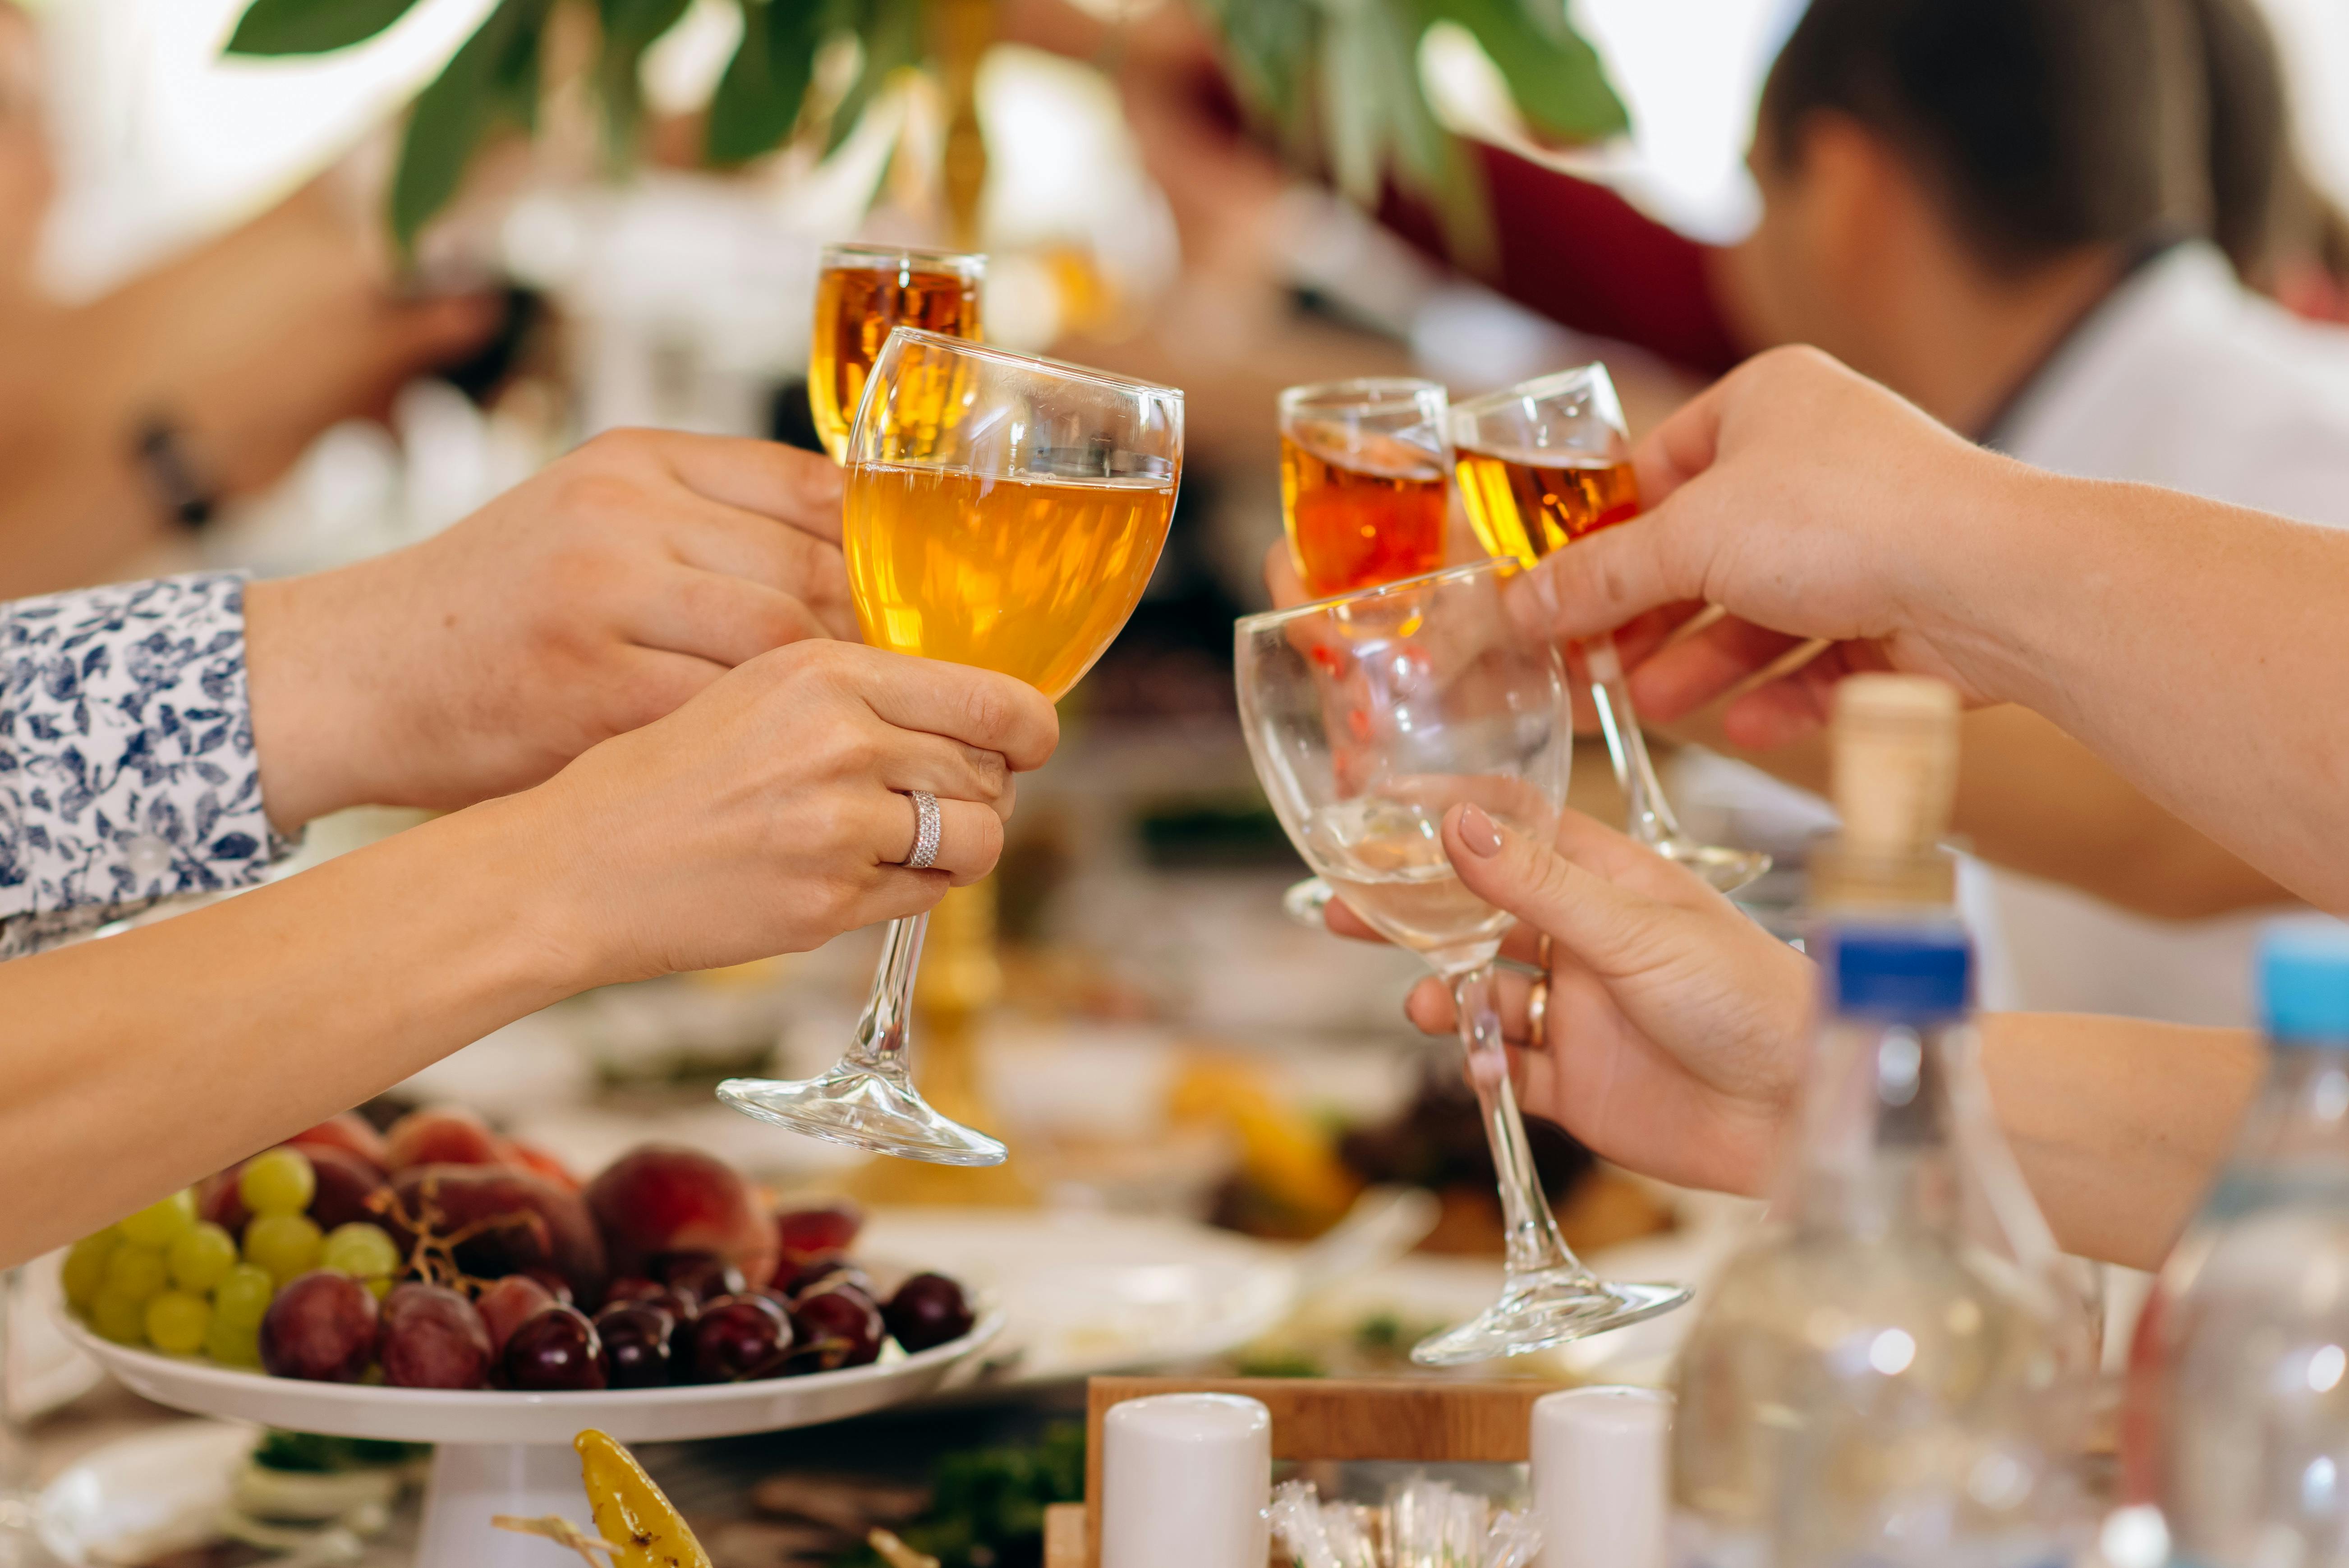 People Toasting Clear Drinking Glasses · Free Stock Photo